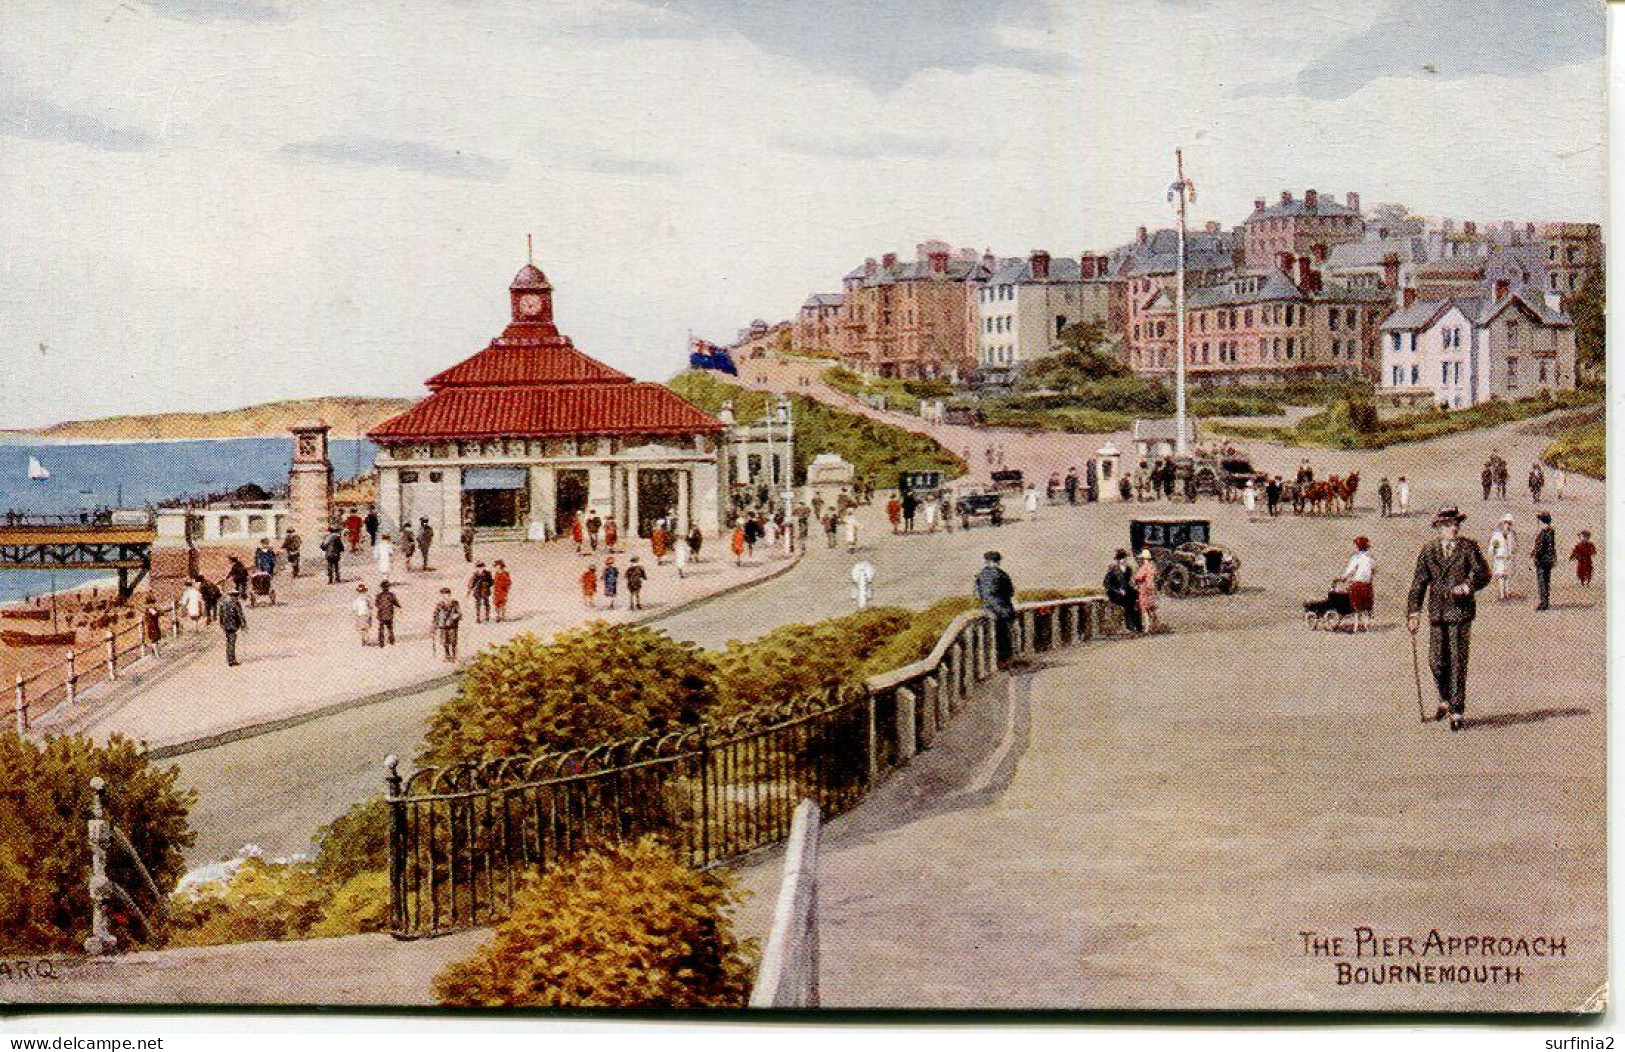 A R QUINTON - SALMON 3592 - THE PIER APPROACH, BOURNEMOUTH - LADY WITH PRAM - Quinton, AR